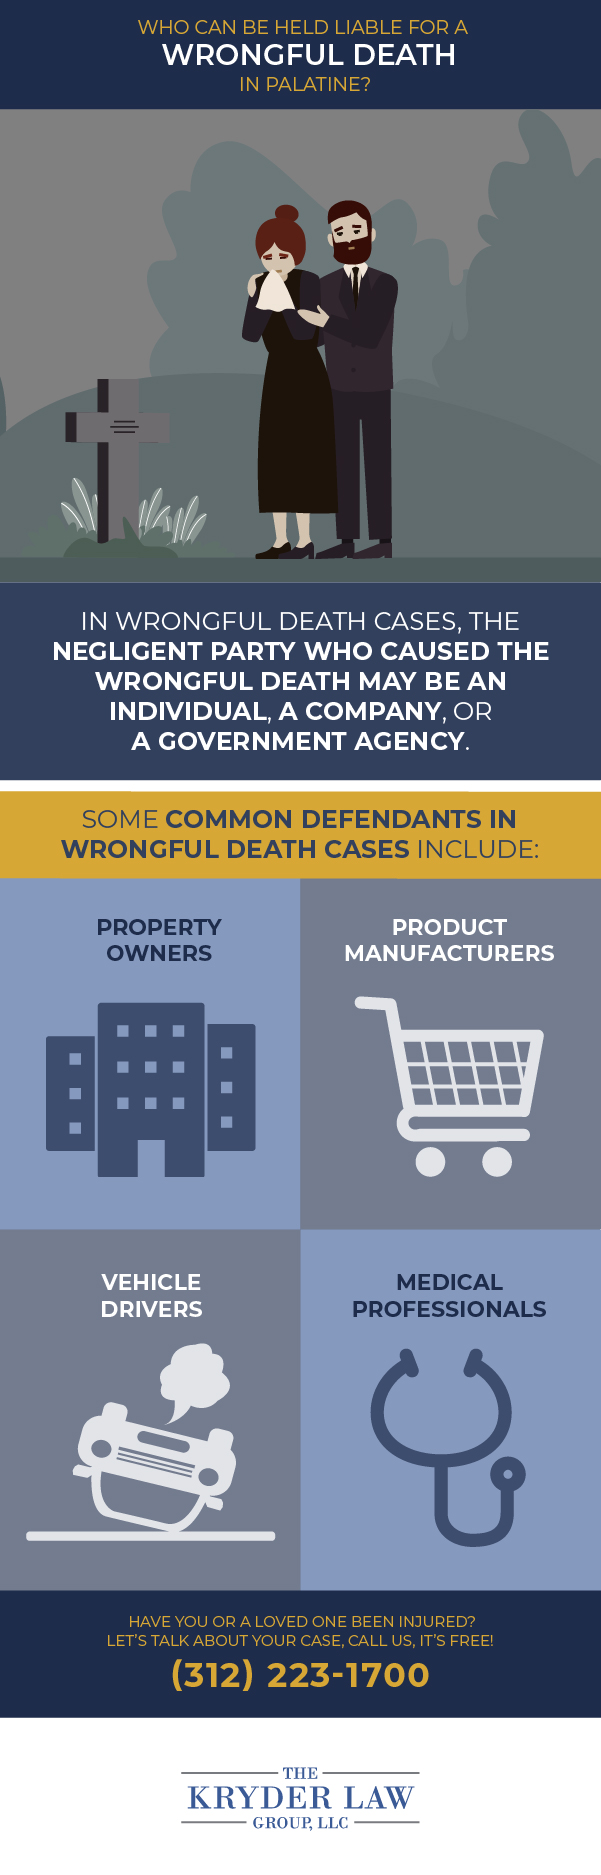 Who Can Be Held Liable for a Wrongful Death in Palatine?